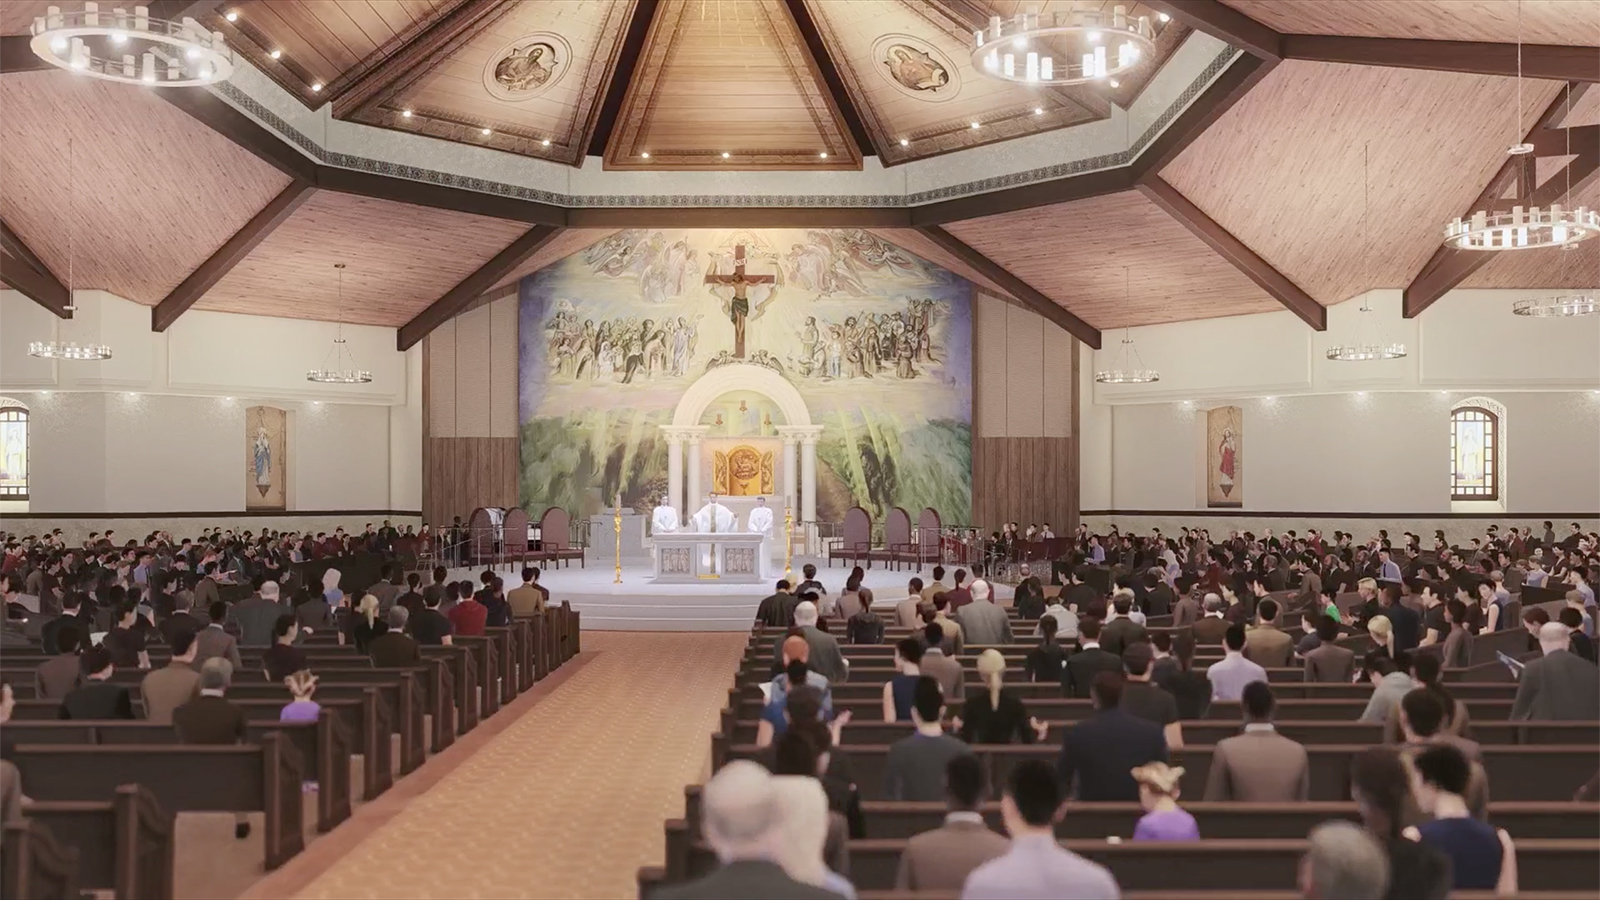 An artistic rendering of the completed St. Charles Borromeo Catholic Church in Visalia, California. Courtesy image